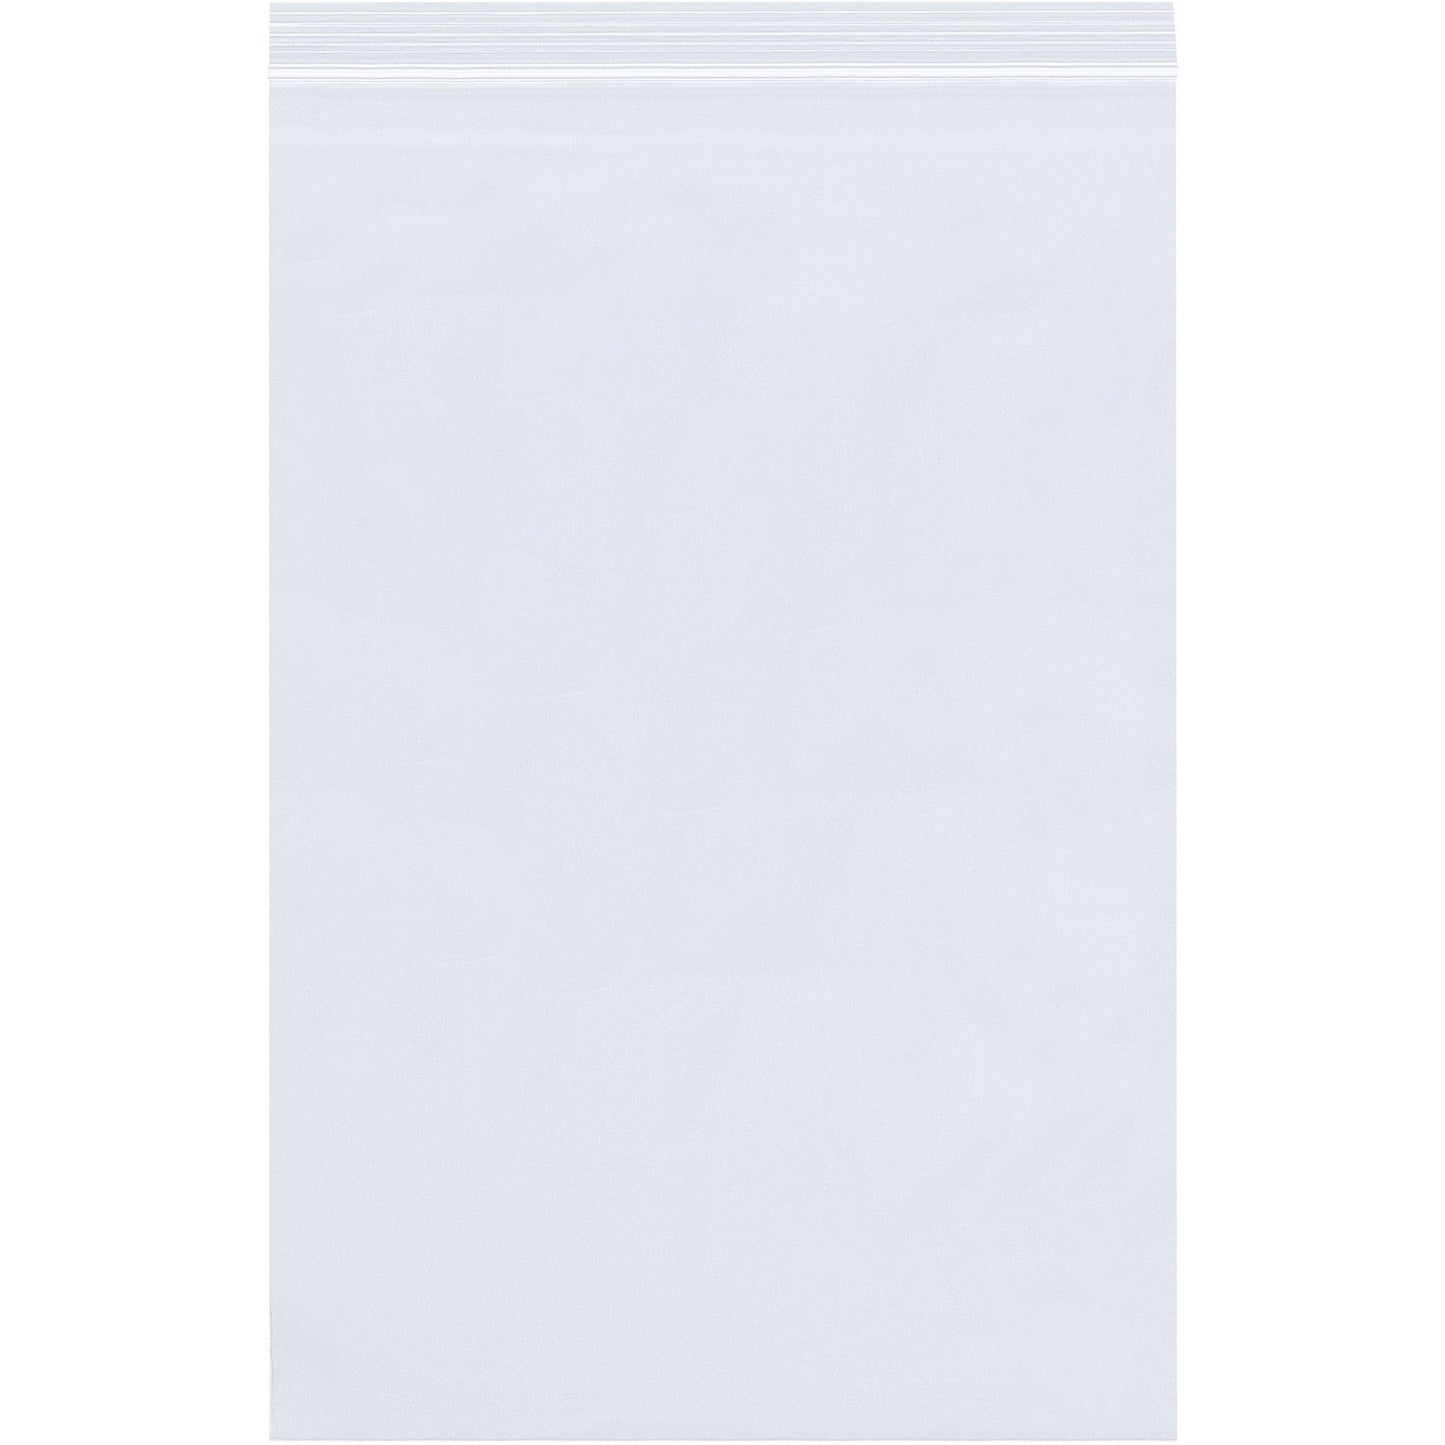 2 1/2 x 12" - 2 Mil Reclosable Poly Bags - PB3521